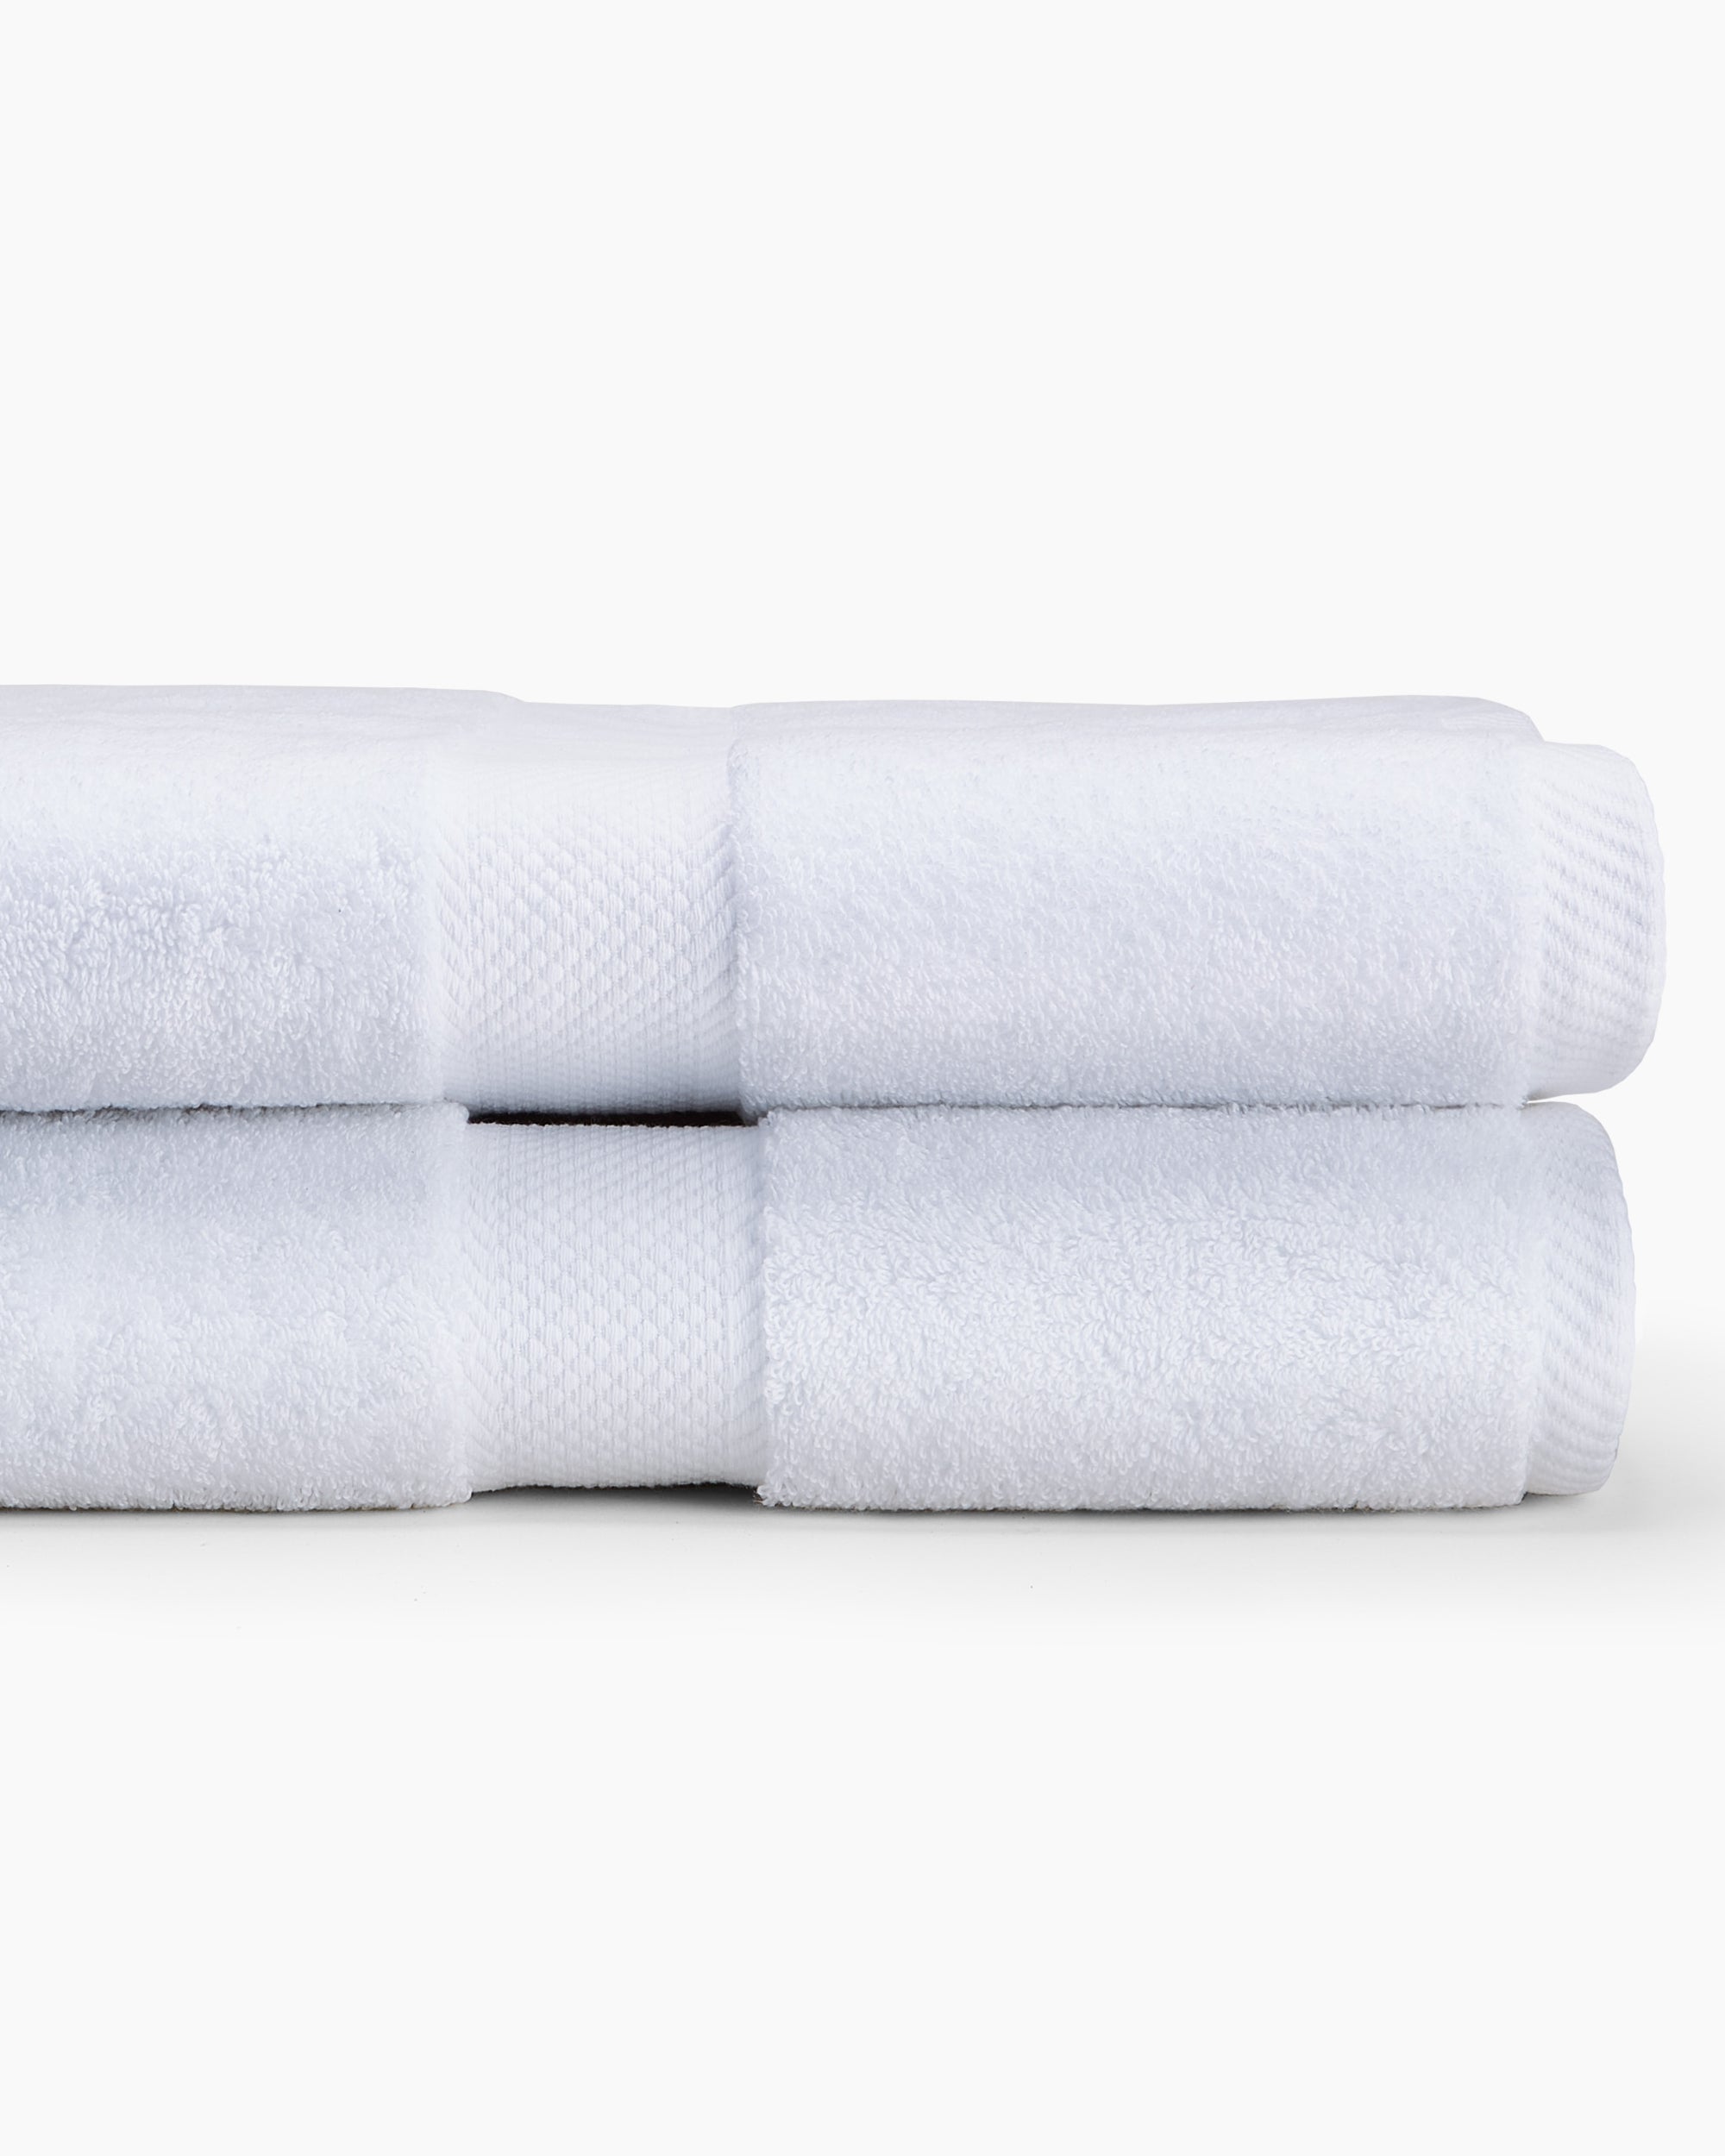 made in america cotton bath towels with ring spun plush cotton